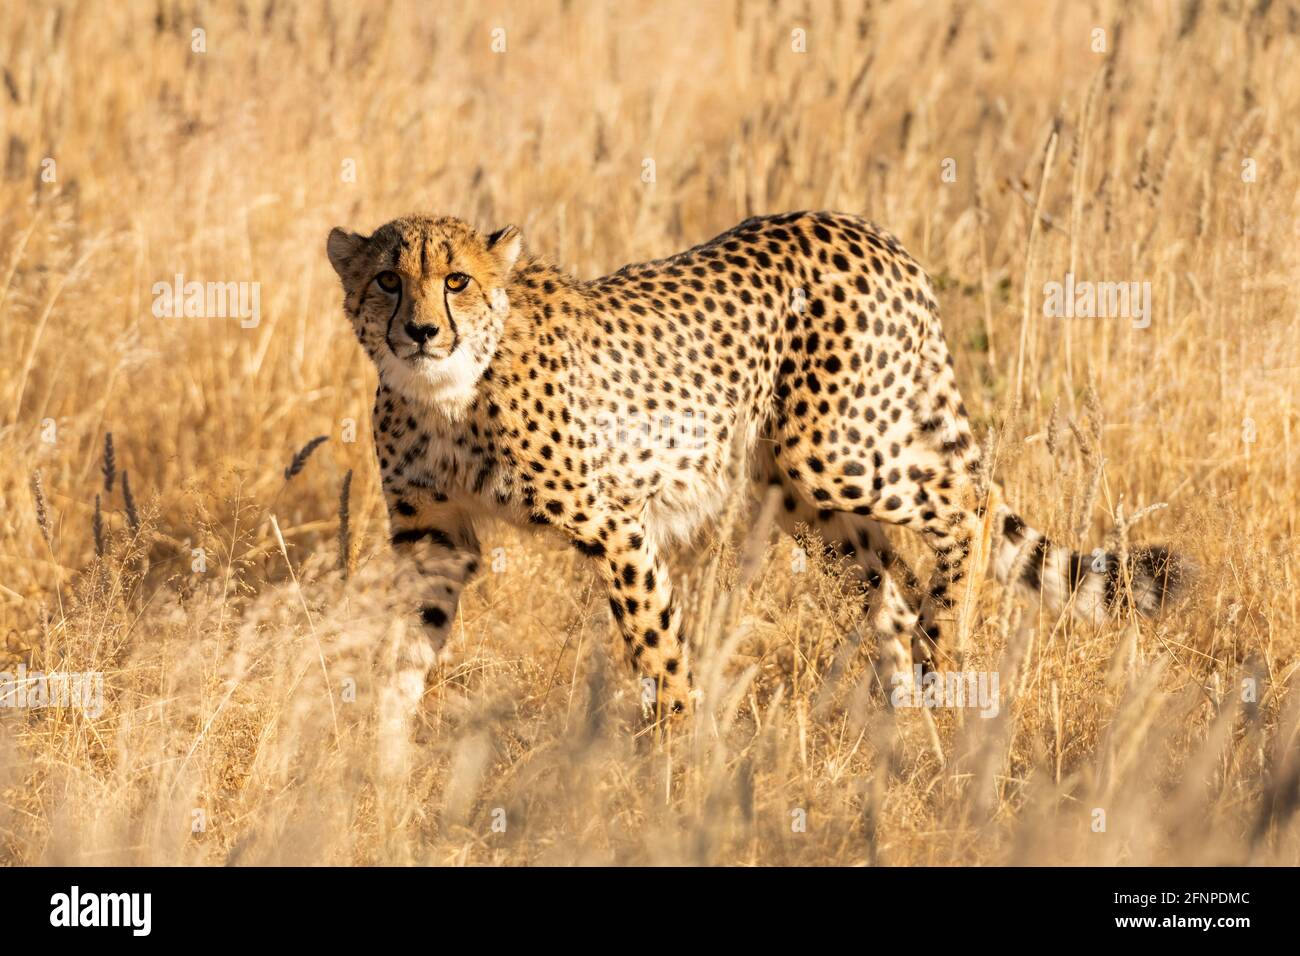 Cheetah standing on dry yellow grass of the African savannah Stock Photo